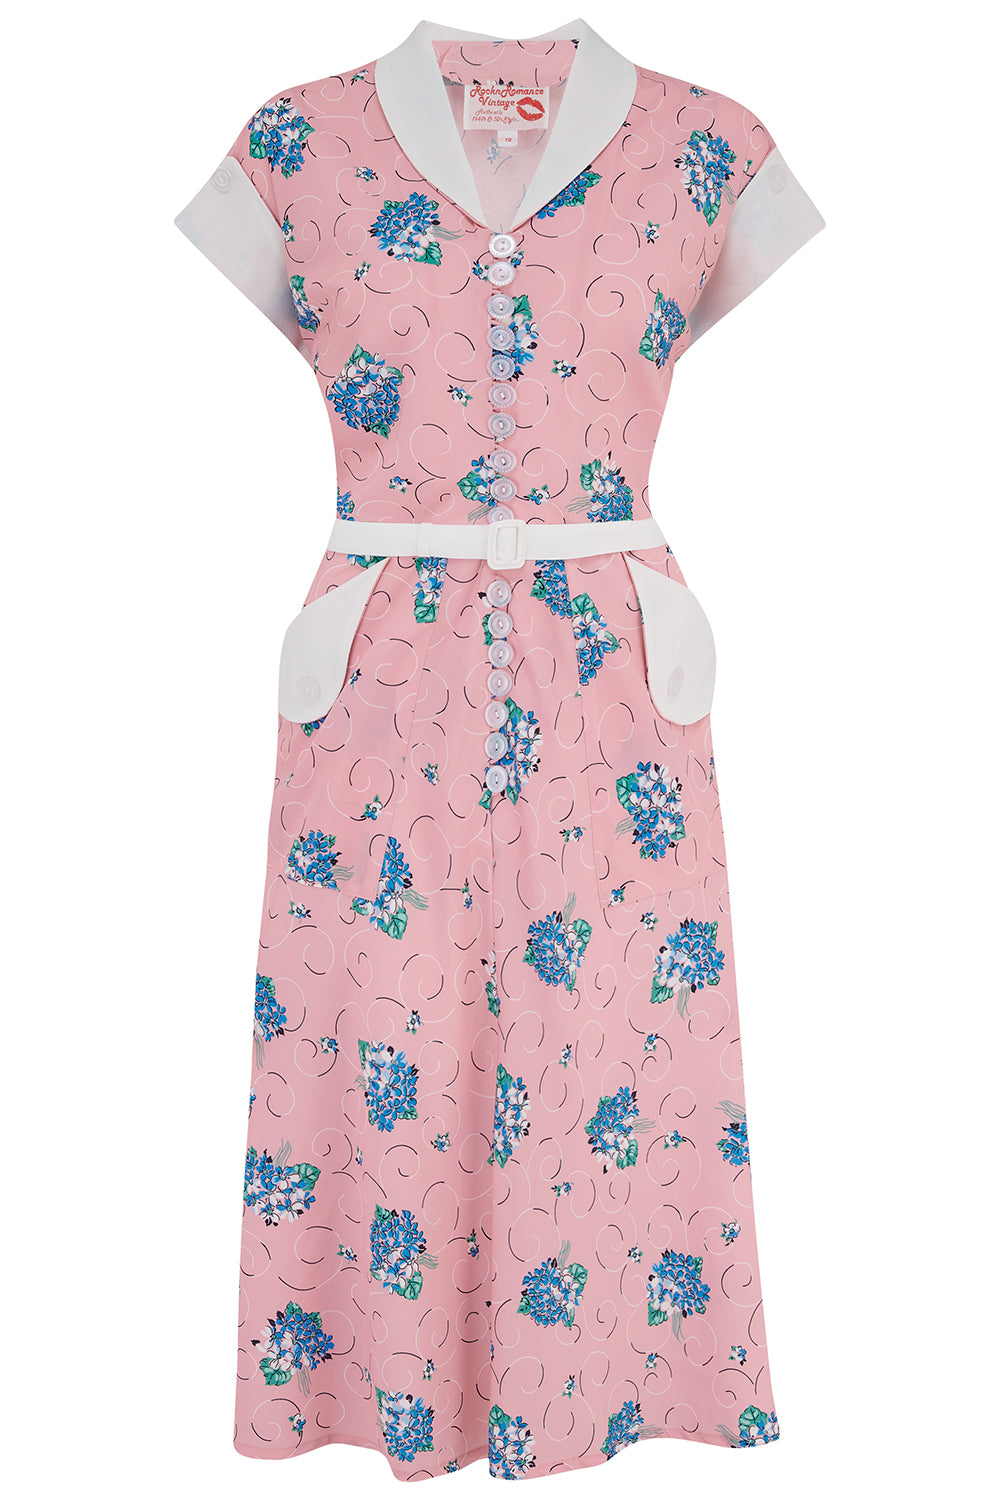 The "Casey" Dress in Pink Summer Bouquet, True & Authentic 1950s Vintage Style